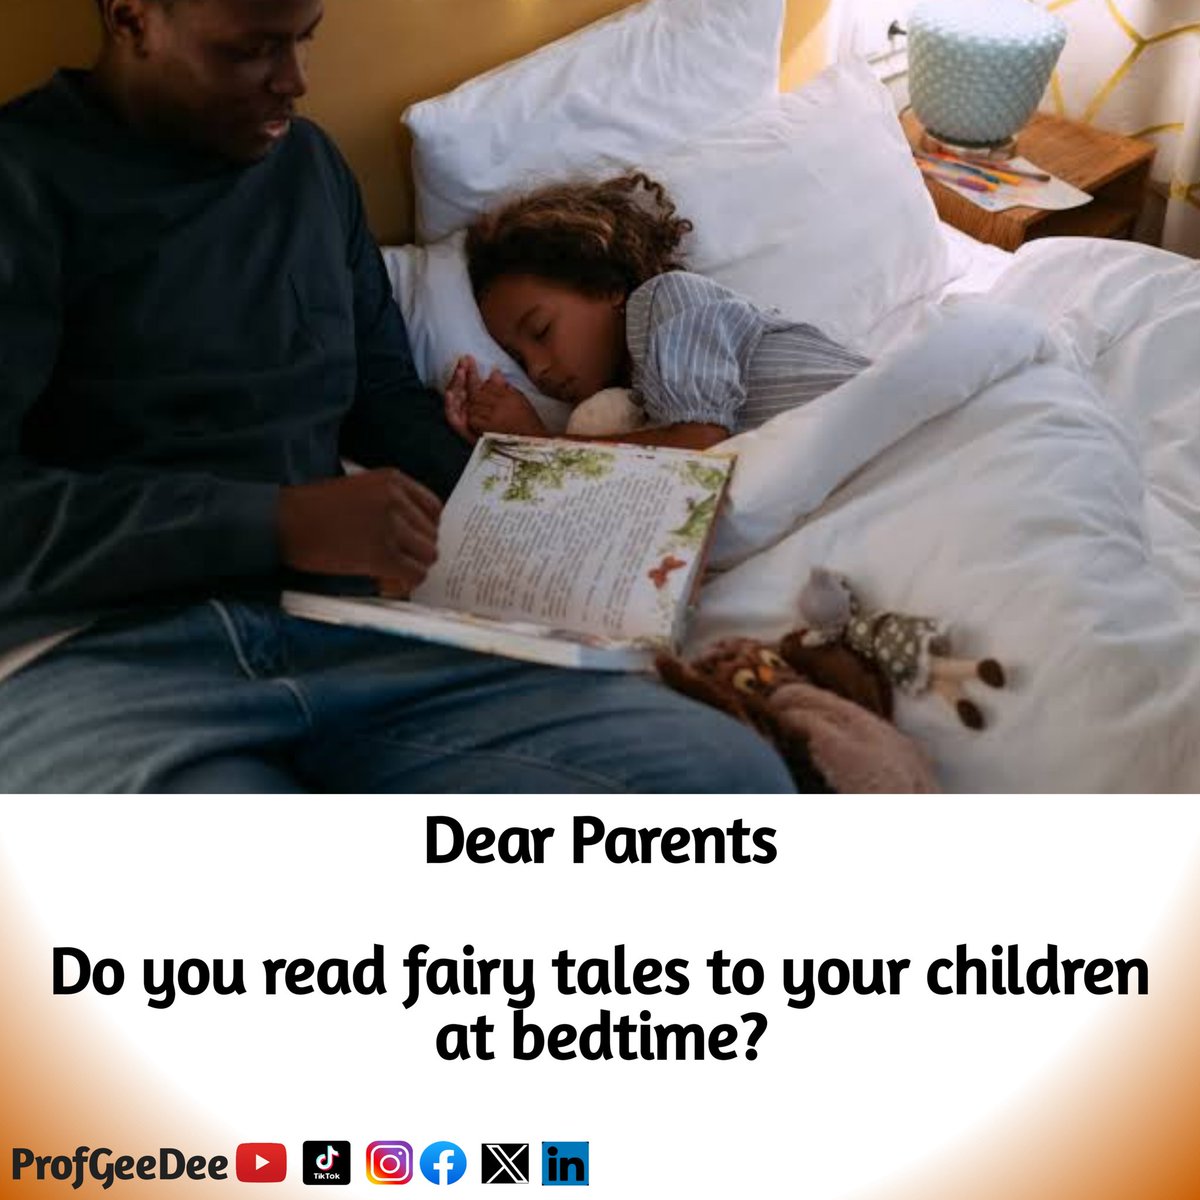 Reading fairytales together can create a strong bond between you and your children, creating precious and lasting memories.

Stories are a good way to connect with your child.

#earlyyears
#earlylearning
#earlychildhooddevelopment
#dearparentseries
#profgeedee